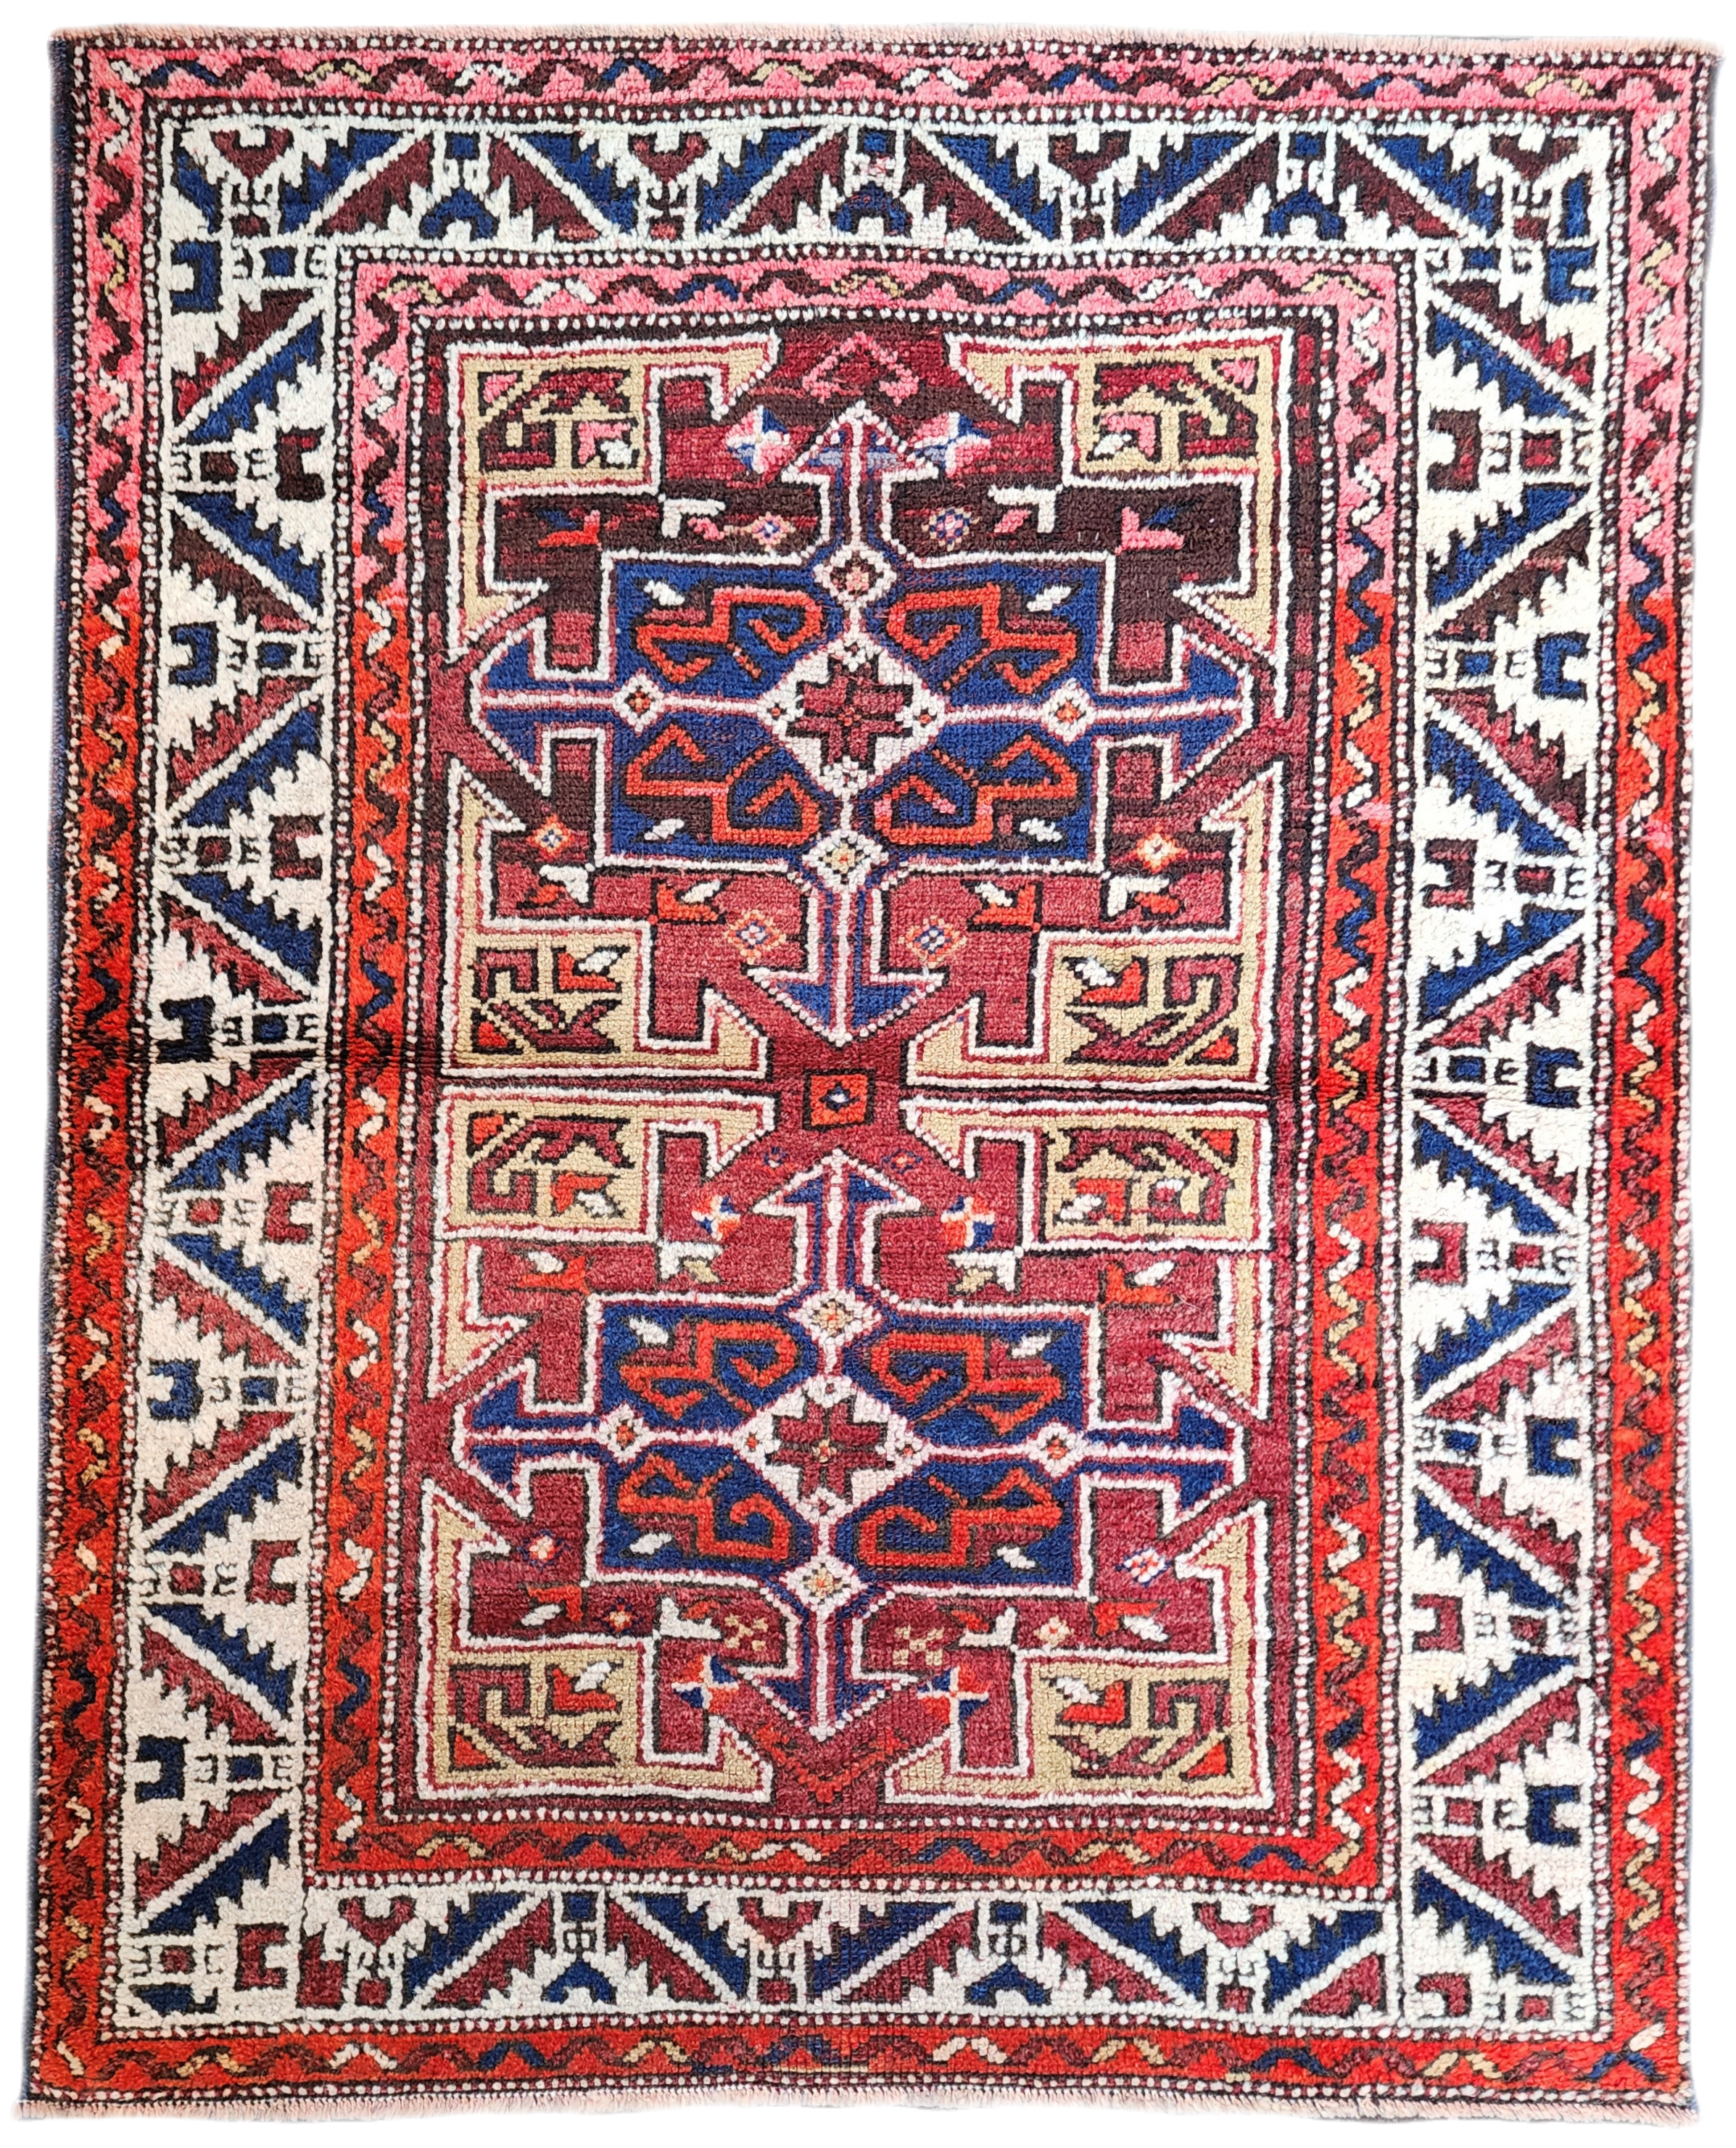 SOURCING VINTAGE AND ANTIQUE ORIENTAL RUGS